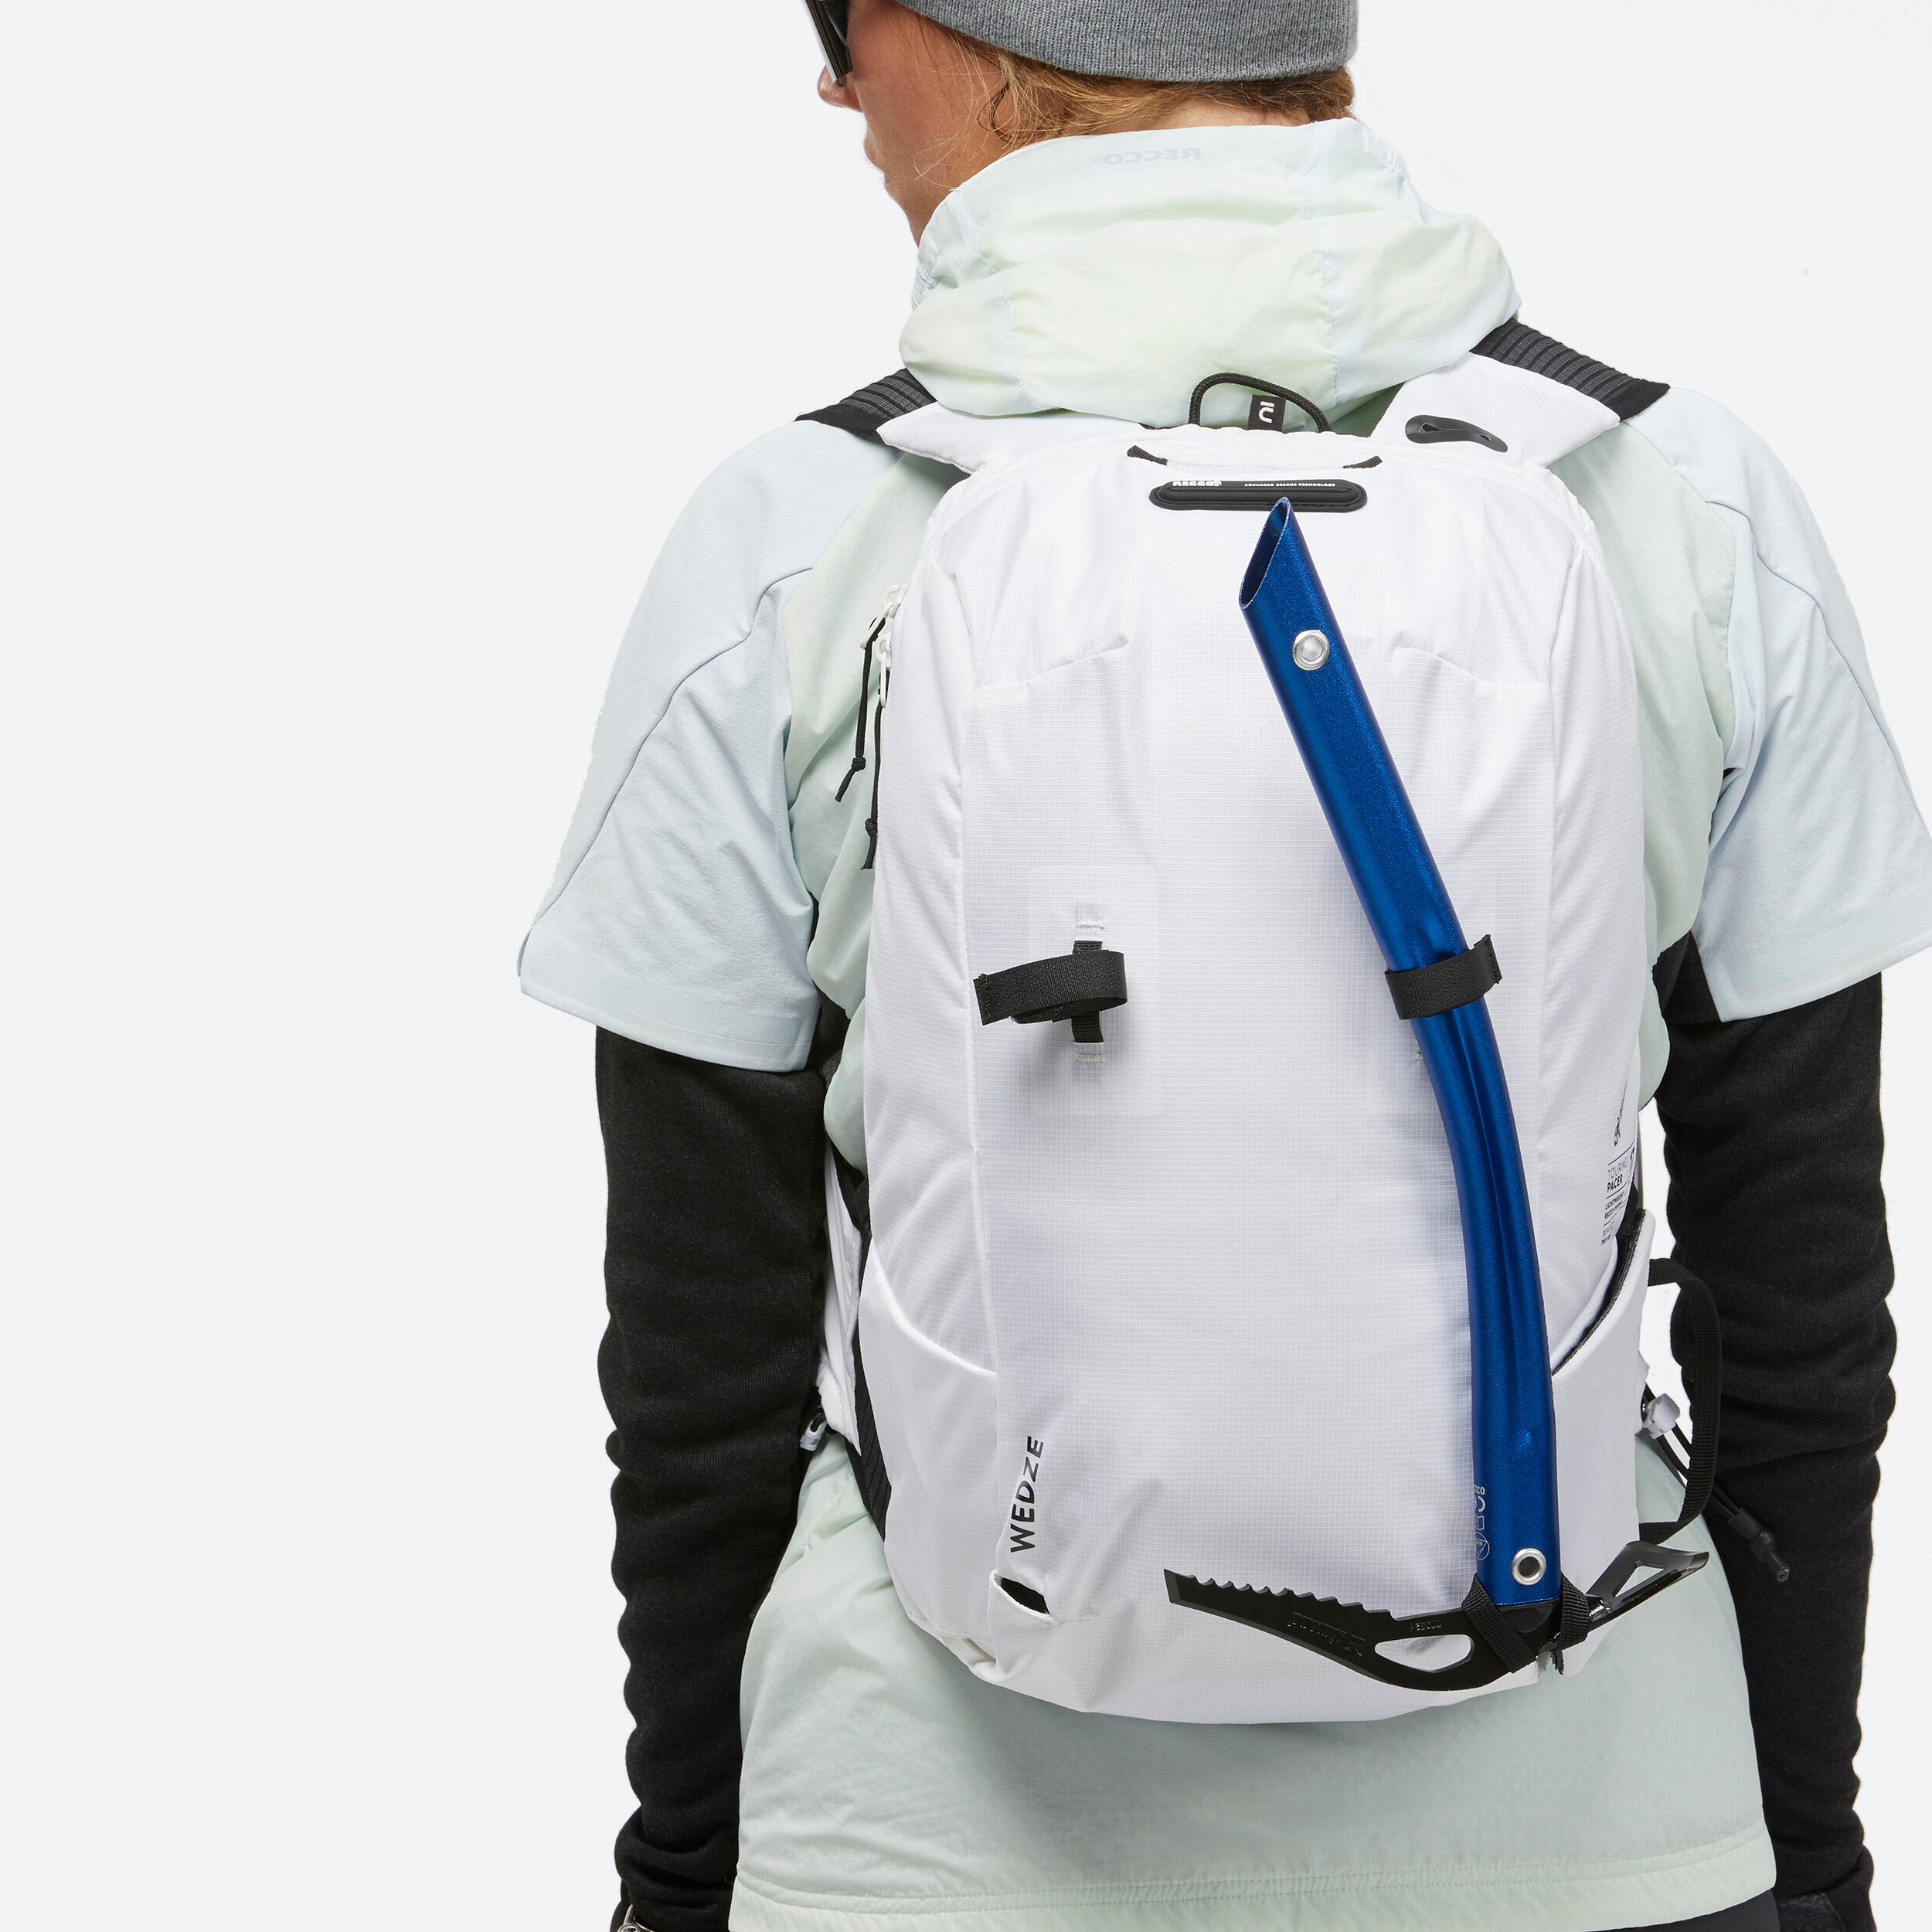 Ski Touring Backpack 17 L - PACER  White and Black 10/18